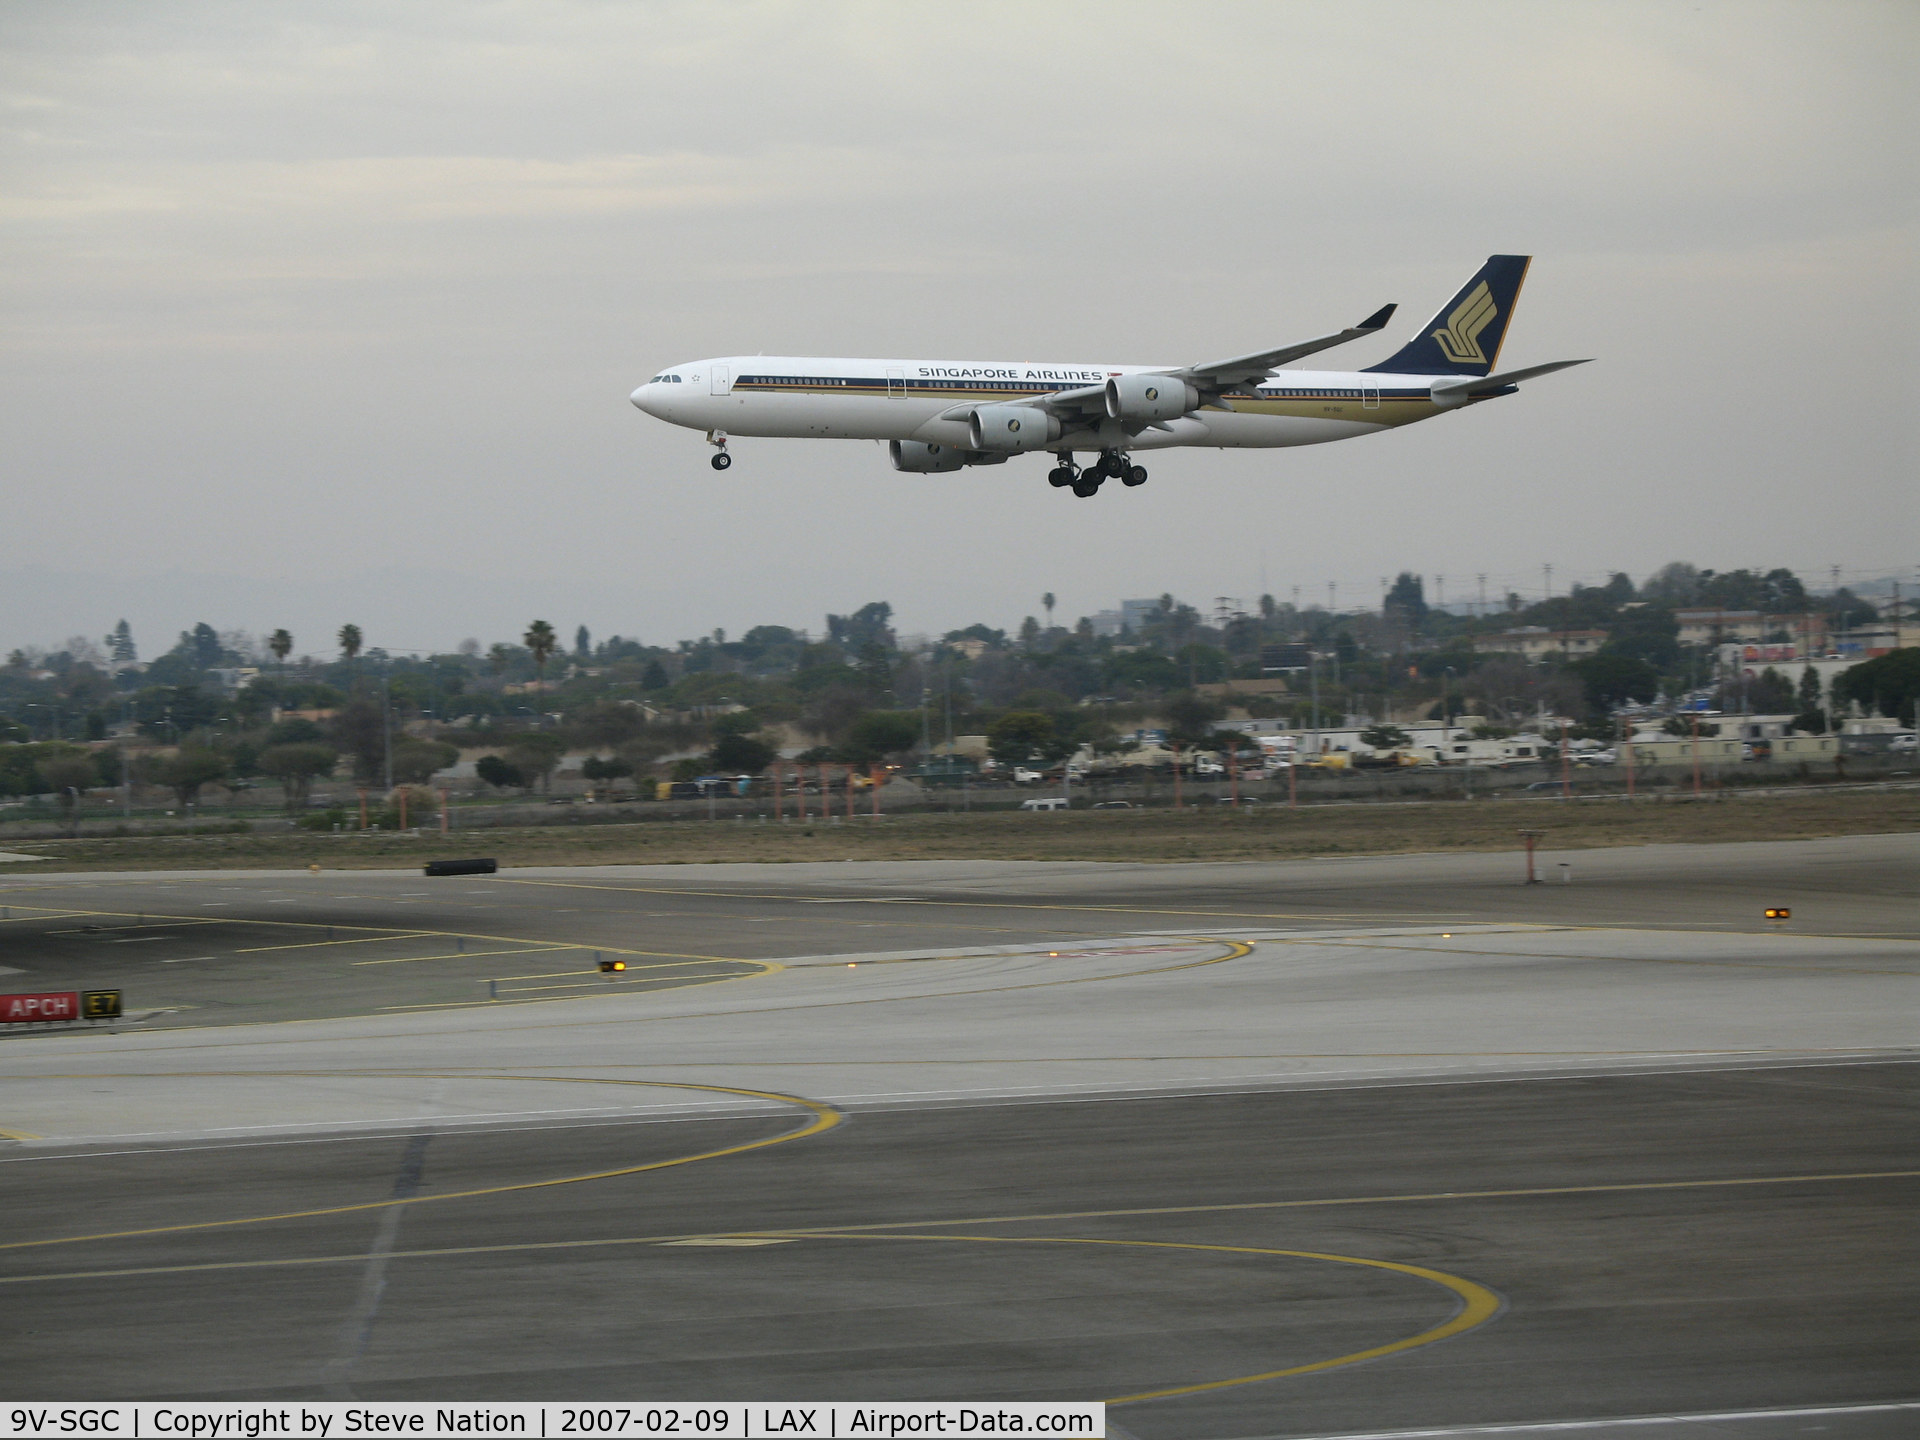 9V-SGC, 2003 Airbus A340-541 C/N 478, Singapore Airlines A340-541 on final approach to LAX